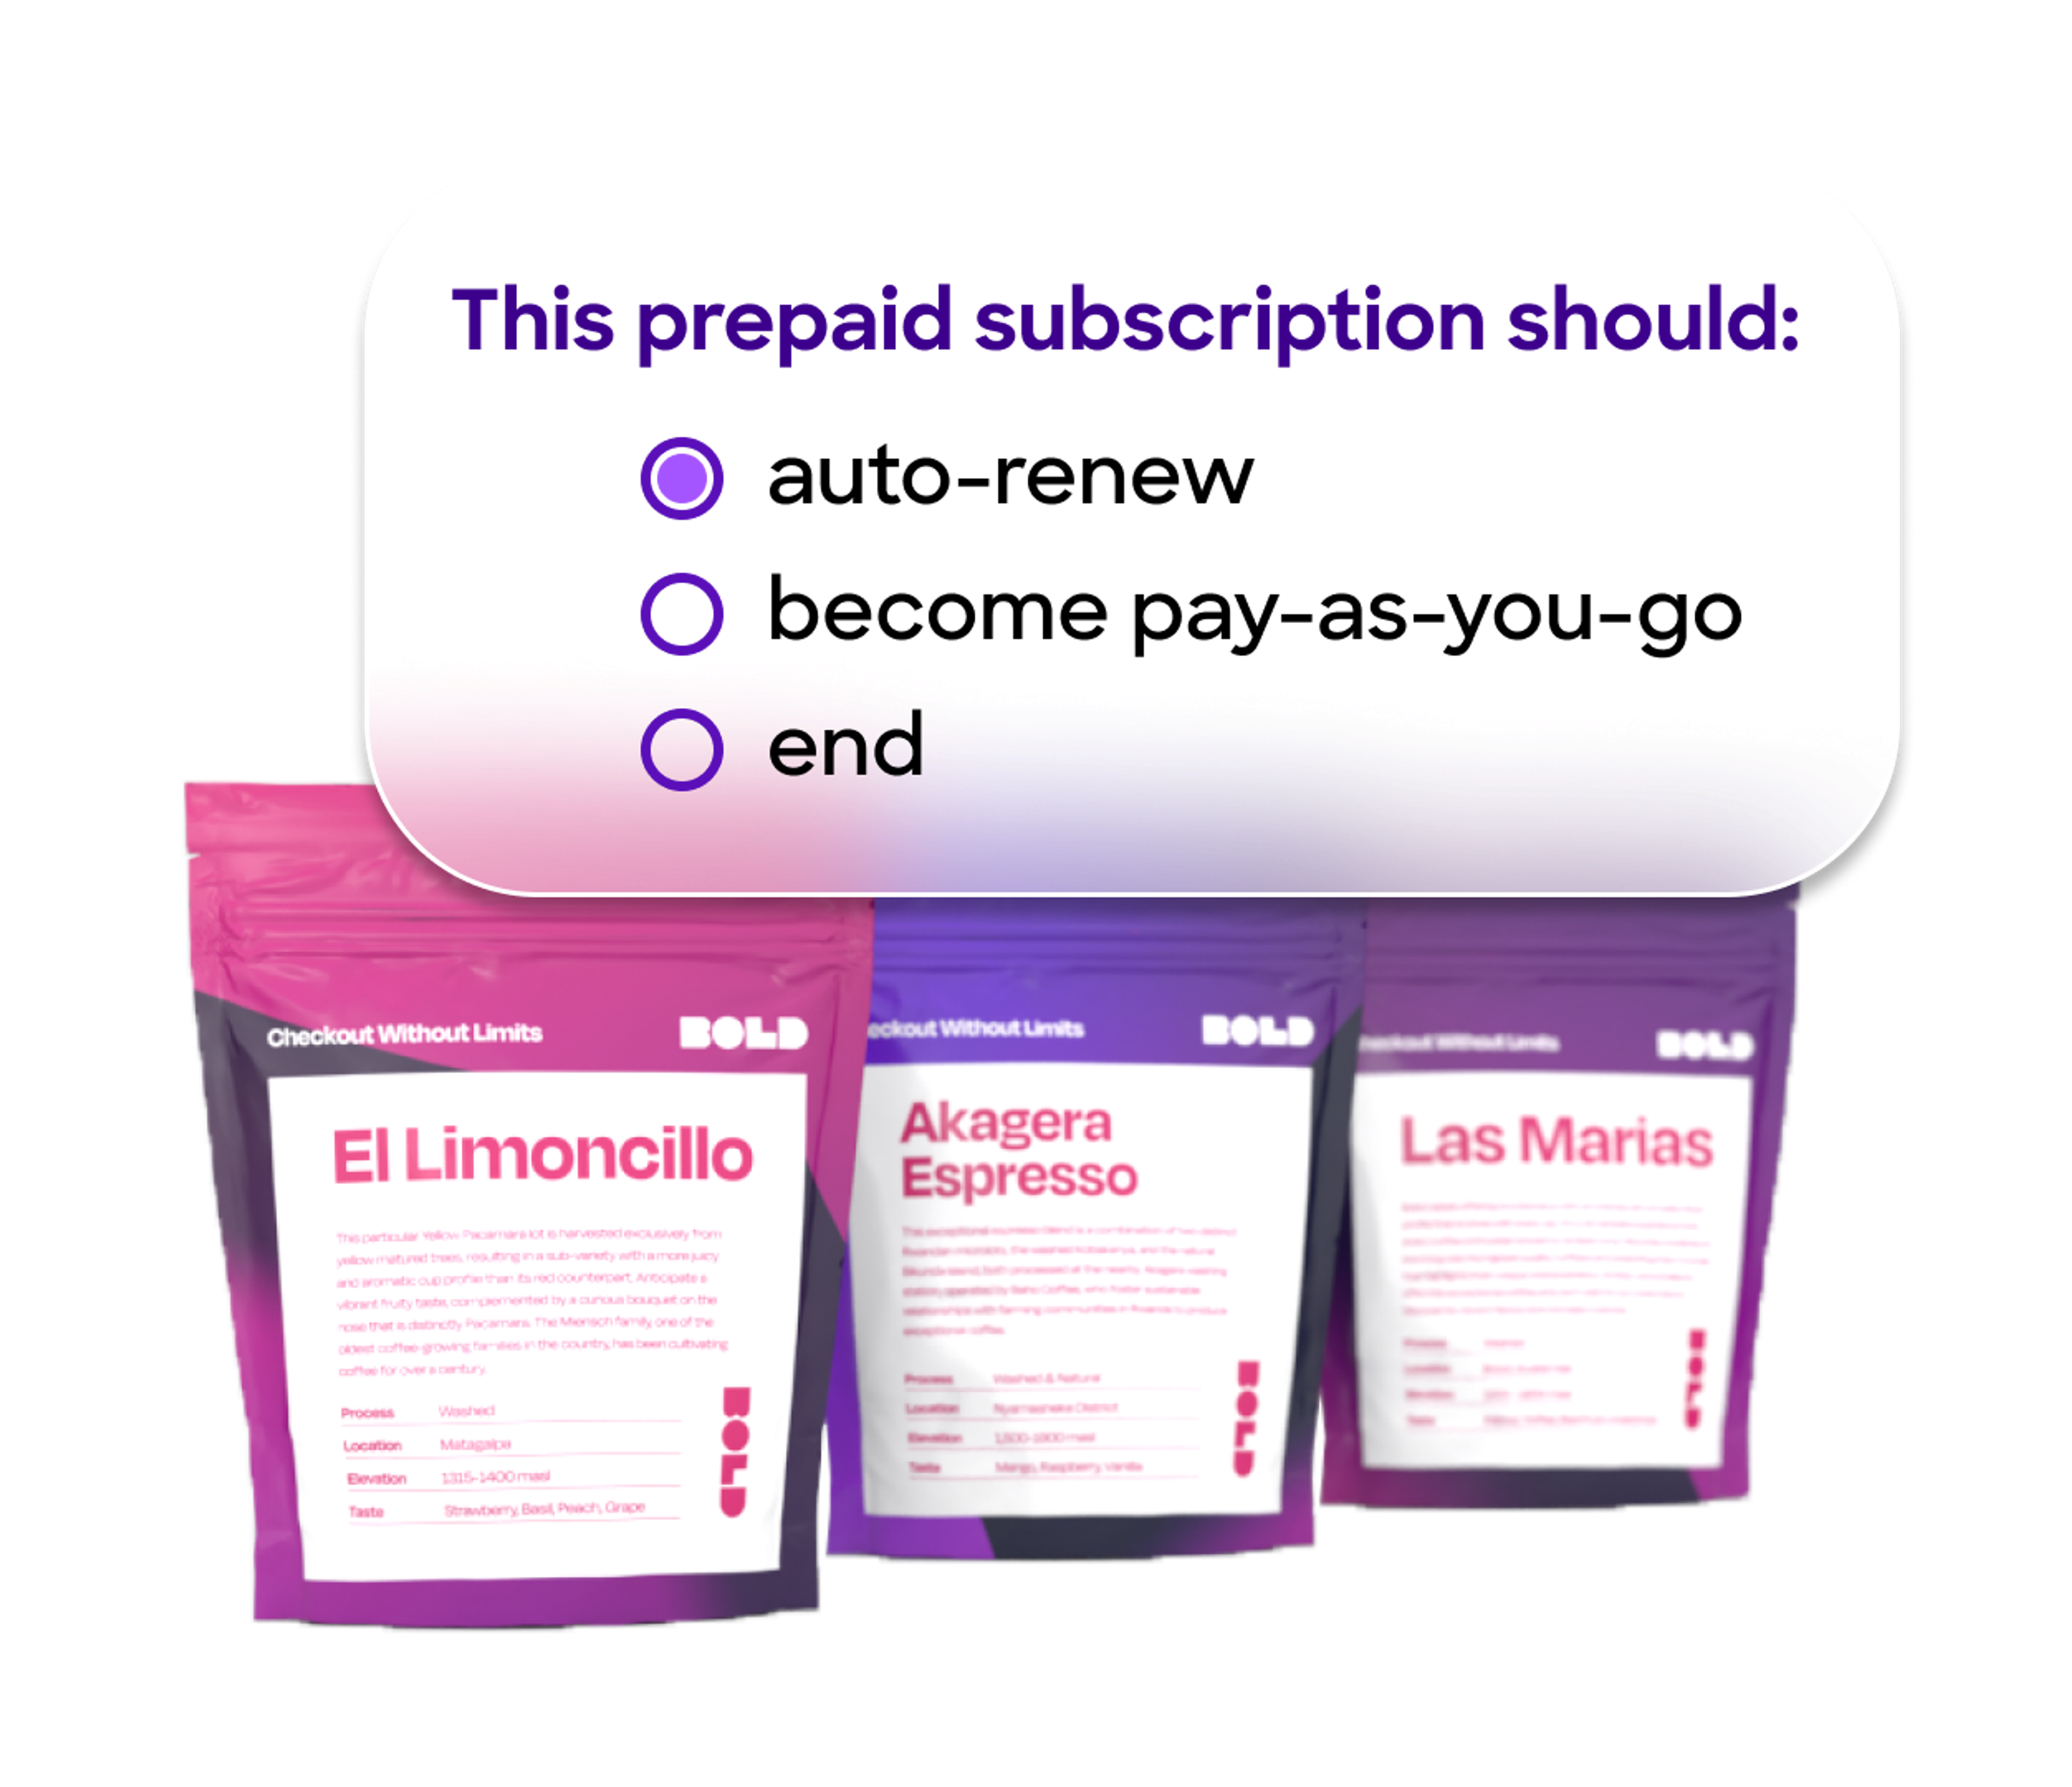 Prepaid subscriptions, done right